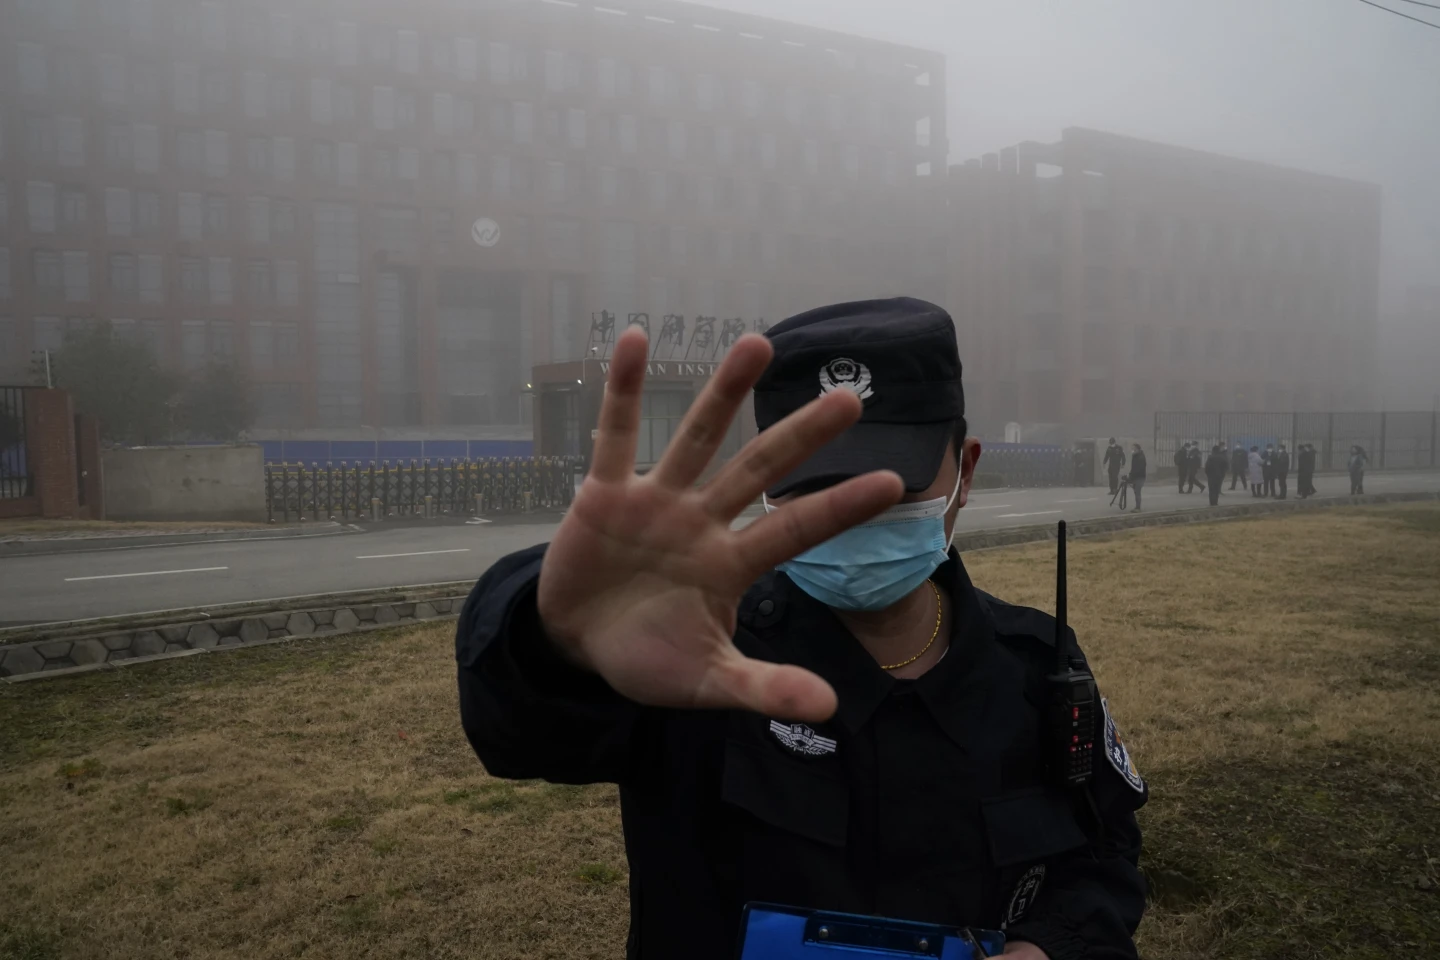 A security person moves journalists away from the Wuhan Institute of Virology after a World Health Organization team arrived for a field visit in Wuhan in China’s Hubei province on Feb. 3, 2021.  AP/RSS Photo